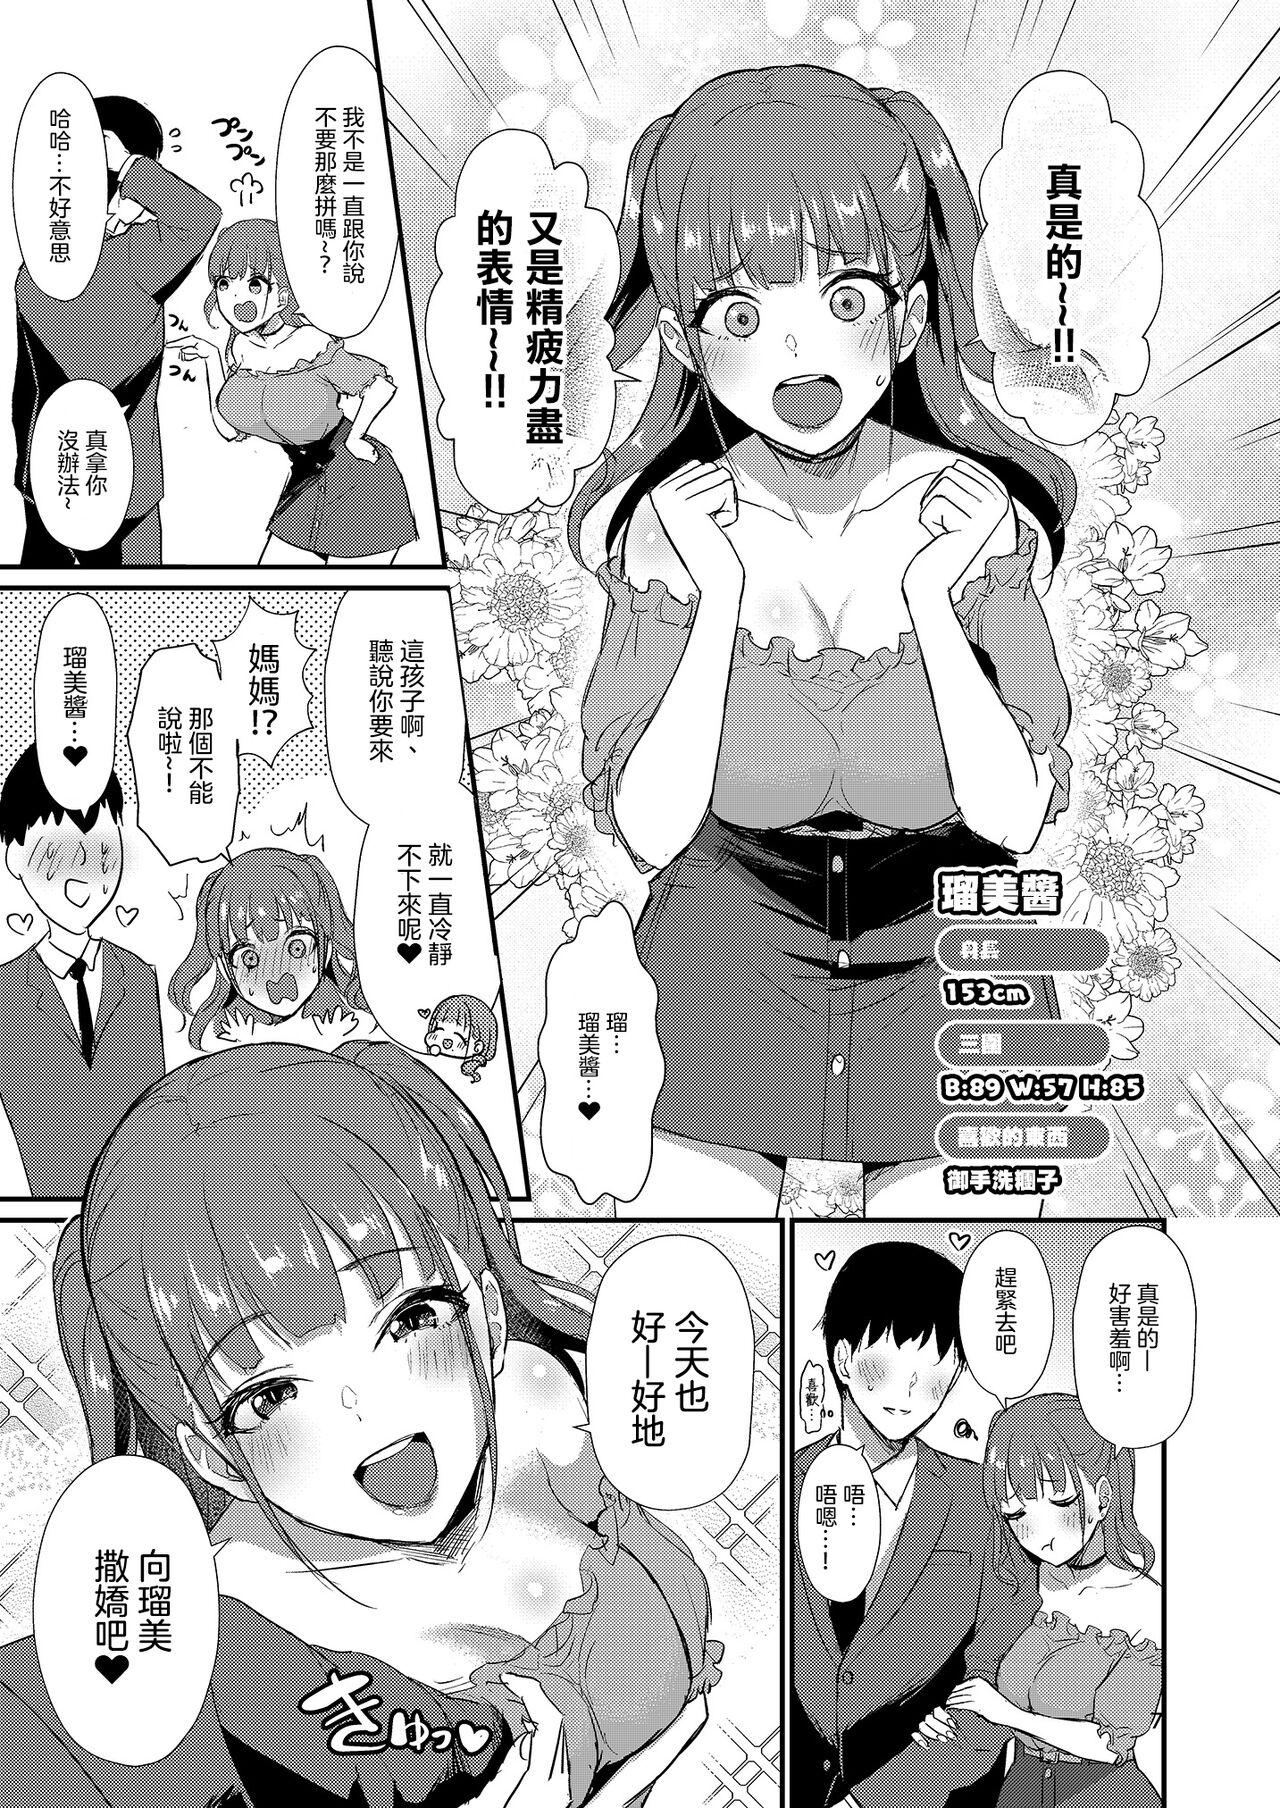 Gaycum Homehome Home e Youkoso! - Welcome to Home Home Home! | 歡迎來到誇誇屋！ - Original Panty - Page 8